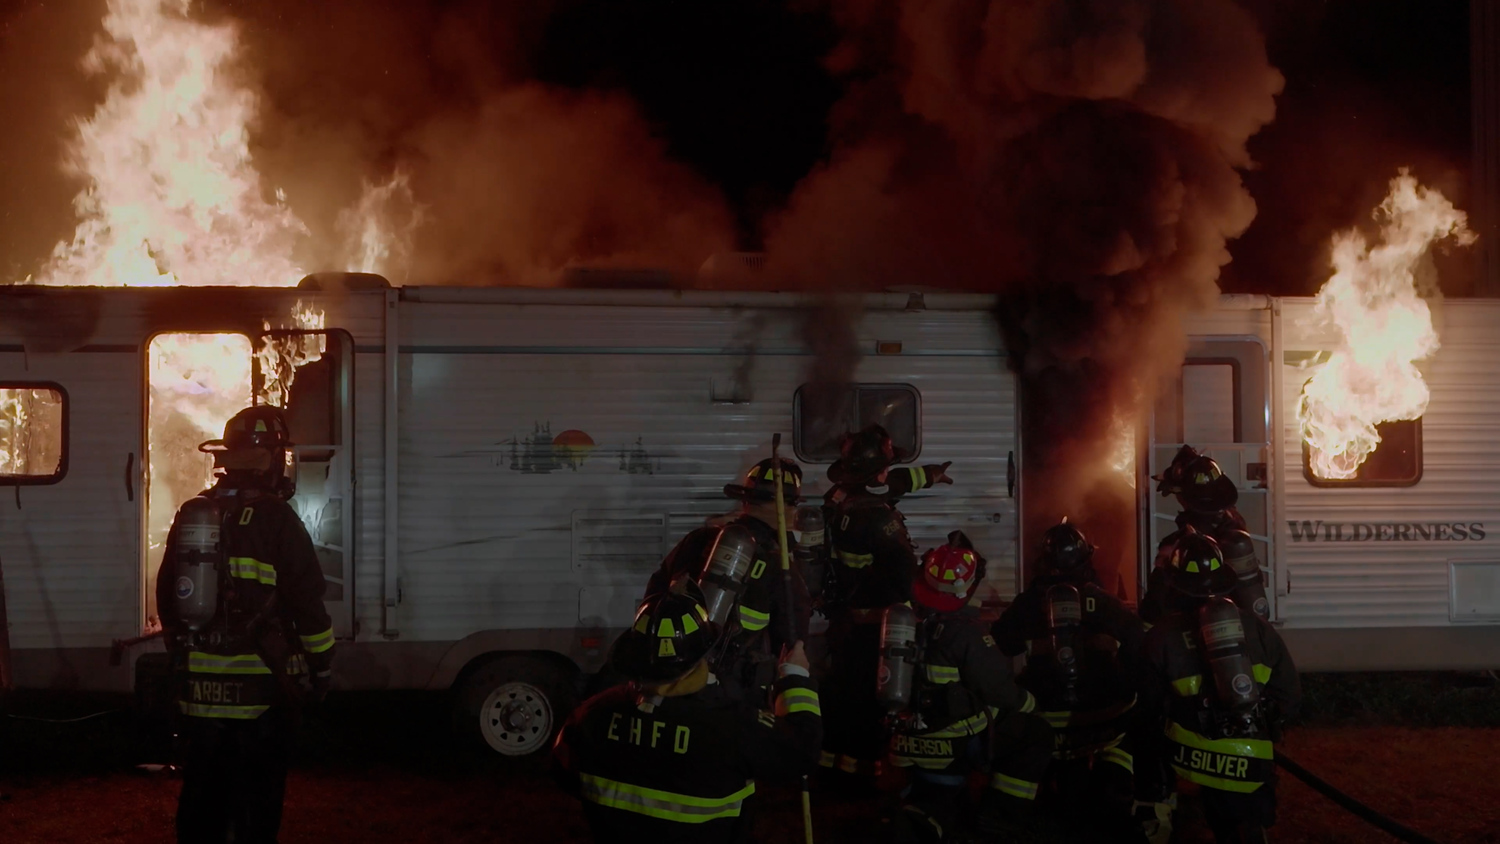 East Hampton Fire Department firefighters battle a blaze in a training exercise depicted in a recruiting video produced by East Hampton Village to attract new volunteers.